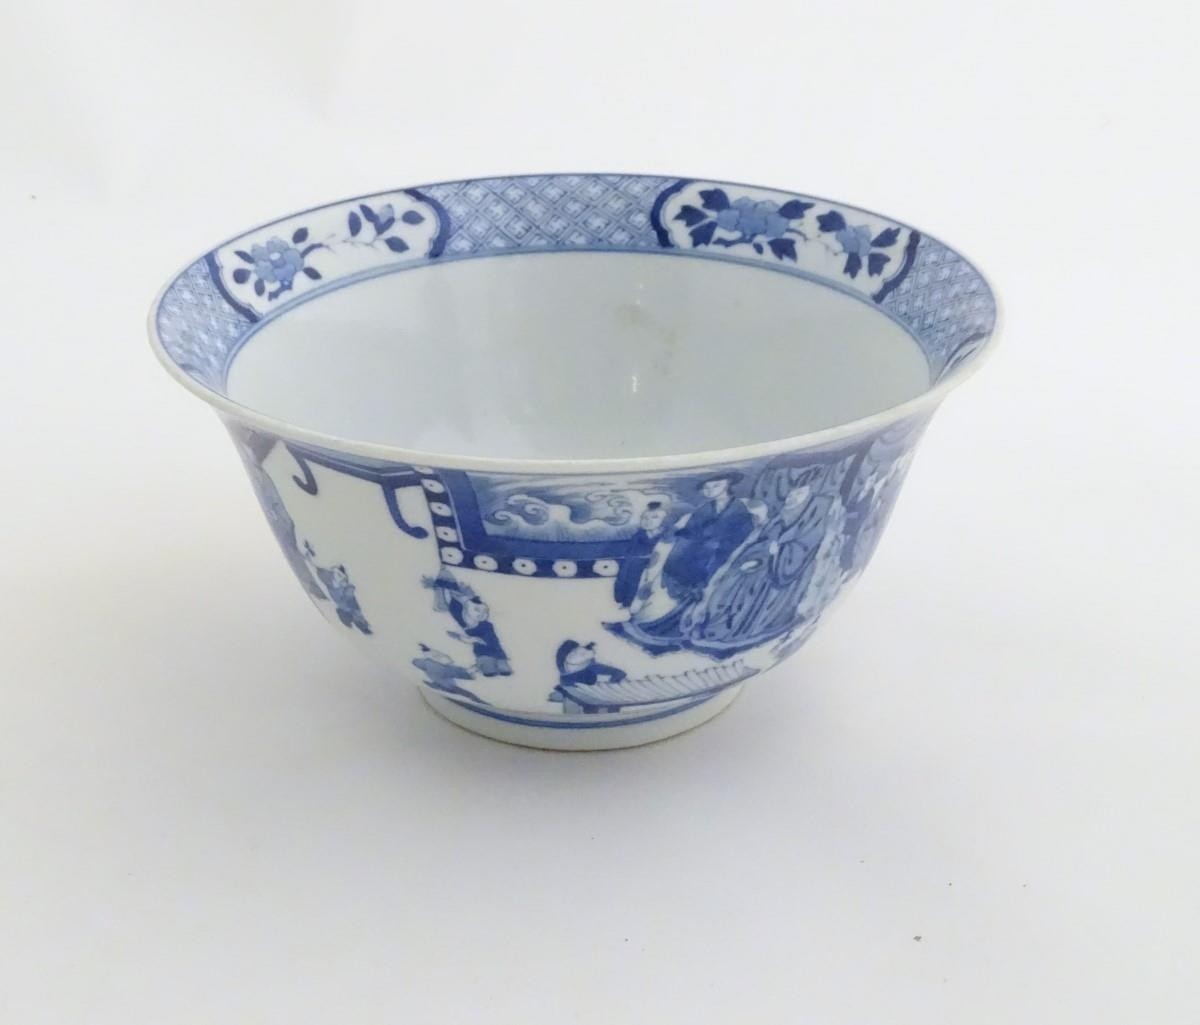 A Chinese blue and white footed bowl with a flared rim, decorated with a scene depicting the - Image 5 of 8